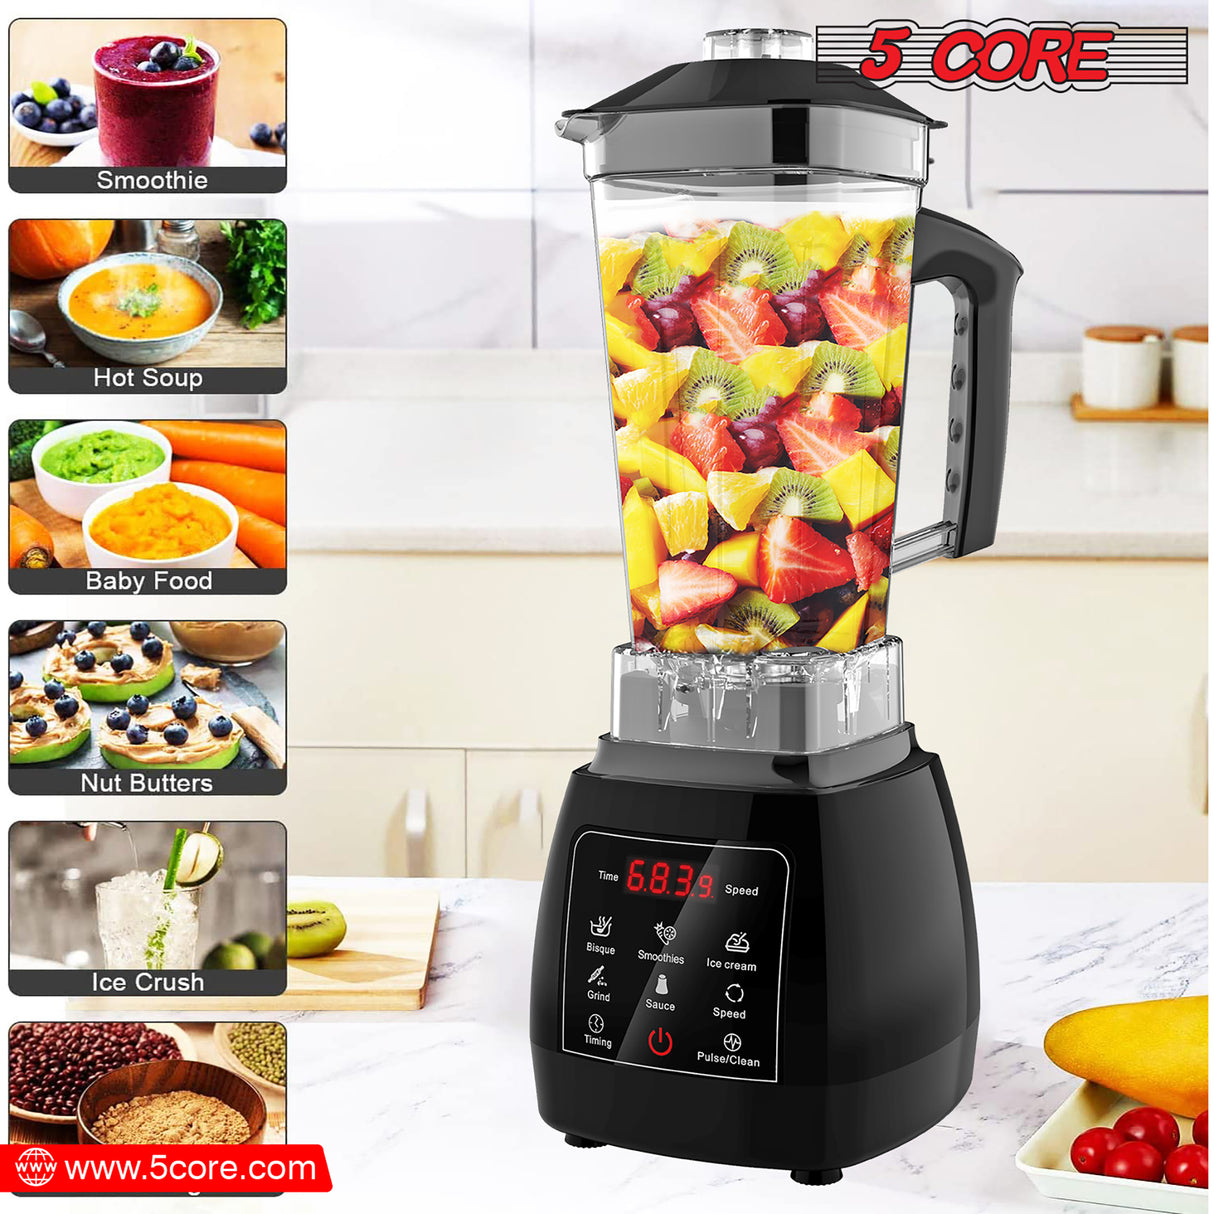 5 Core 2000W Personal Blender for Shakes, Smoothies, Food Prep, and Frozen Blending with Titanium Blade, 68oz Blender Cup- JB 2000 D